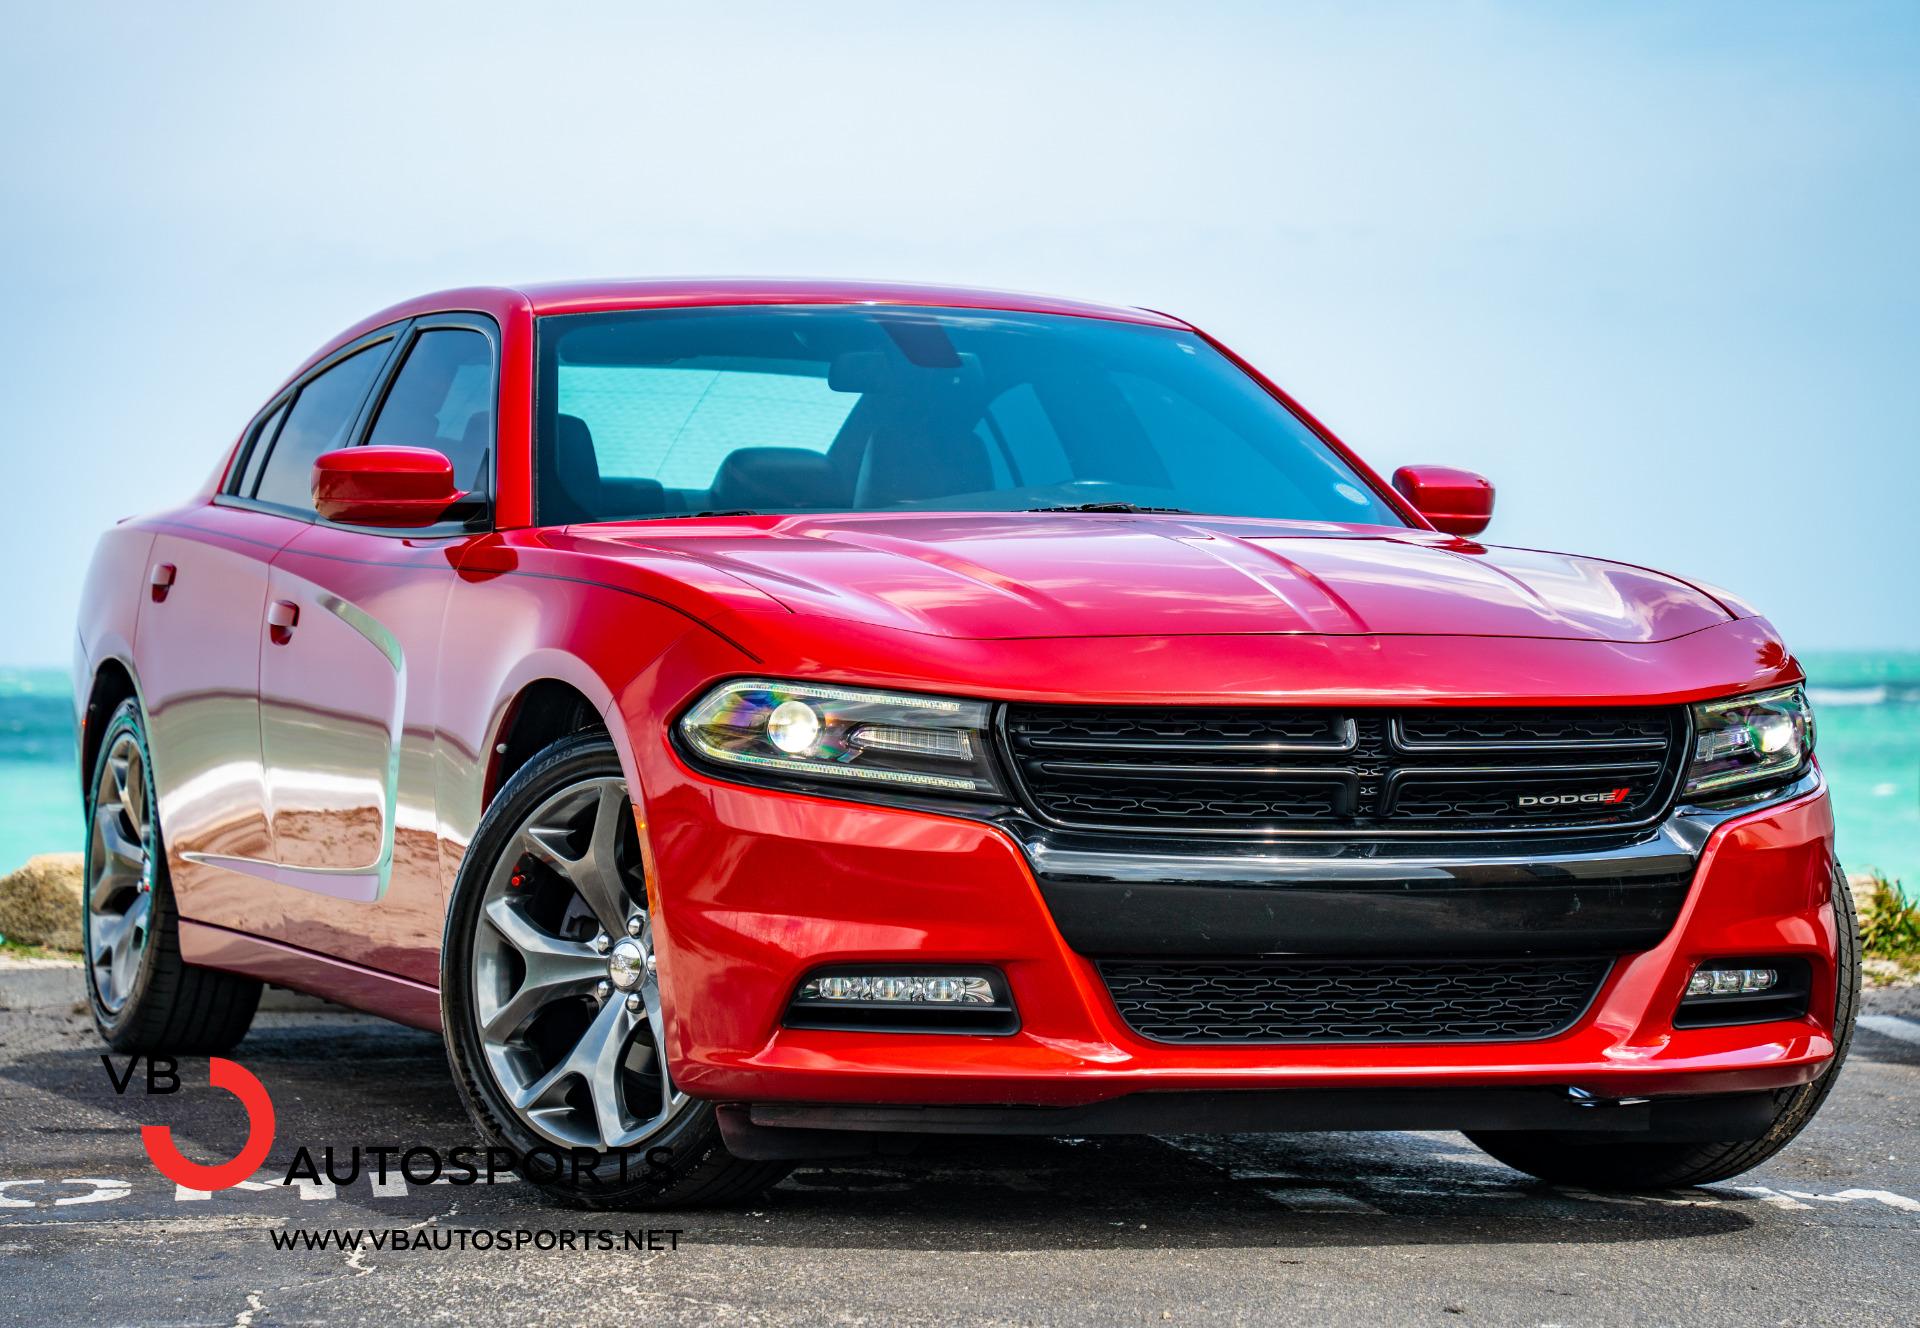 Pre-Owned 2016 Dodge Charger Rallye Edition For Sale (Sold) | VB Autosports  Stock #VB321T